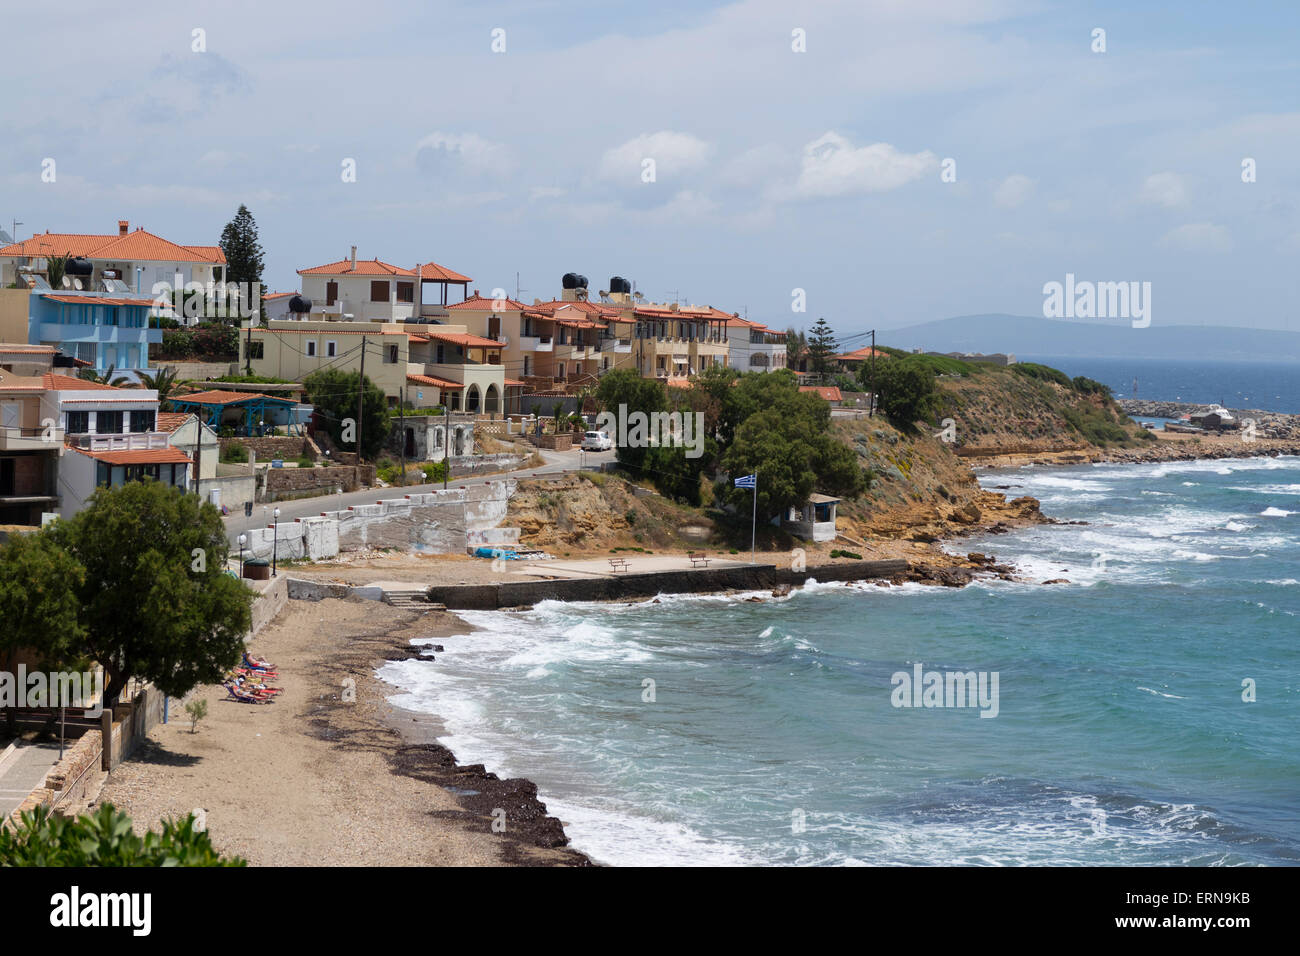 Beach and bay in Mega Limnionas on the isle of Chios, Greece Stock Photo